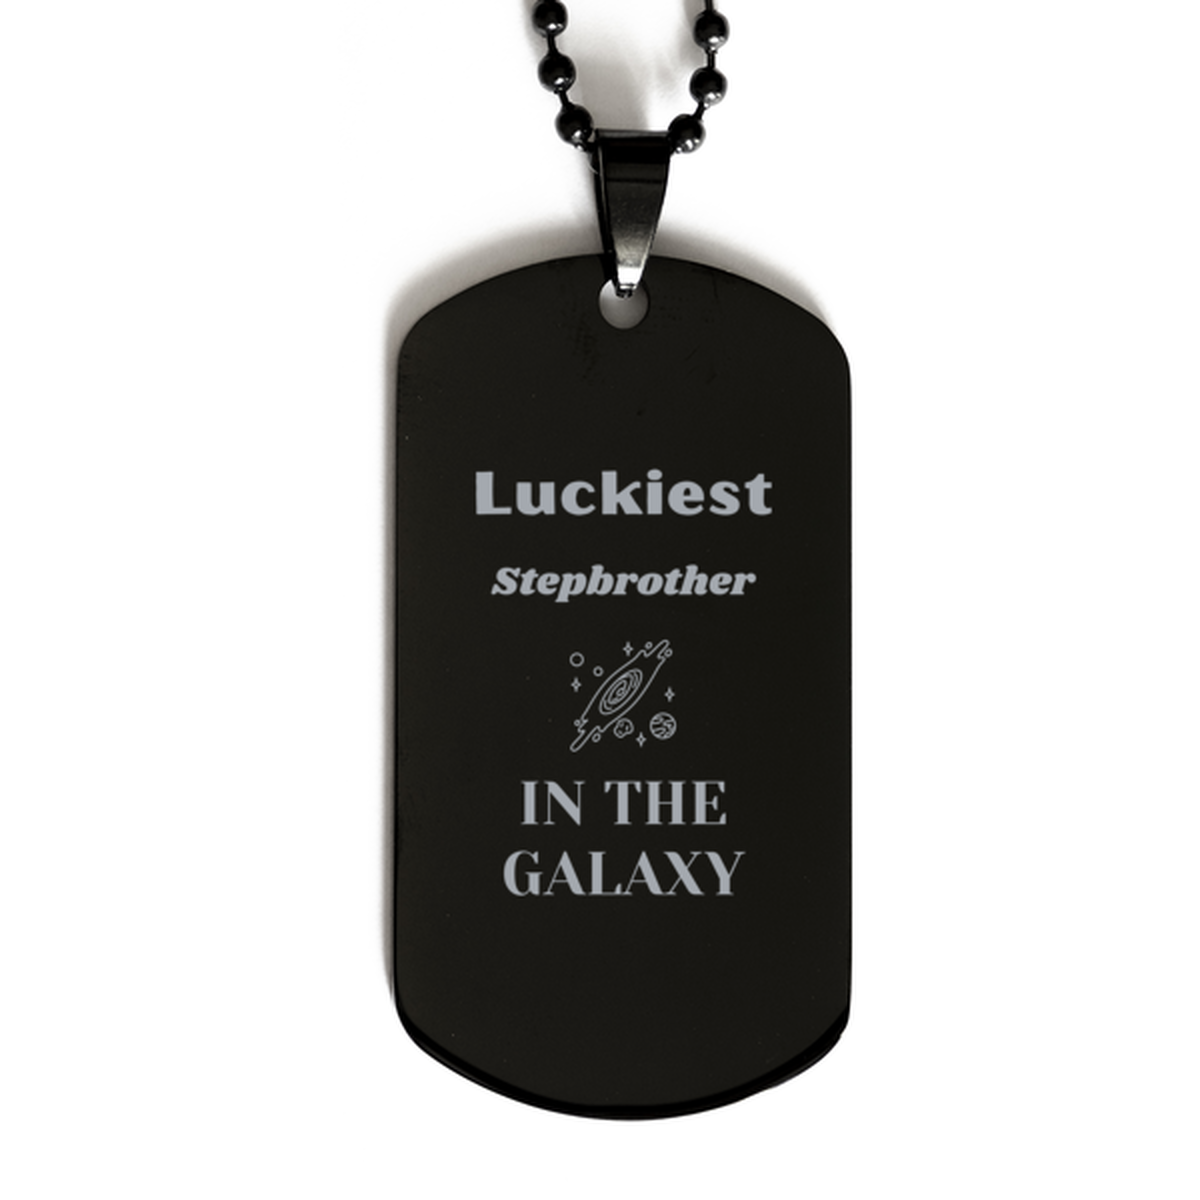 Luckiest Stepbrother in the Galaxy, To My Stepbrother Engraved Gifts, Christmas Stepbrother Black Dog Tag Gifts, X-mas Birthday Unique Gifts For Stepbrother Men Women